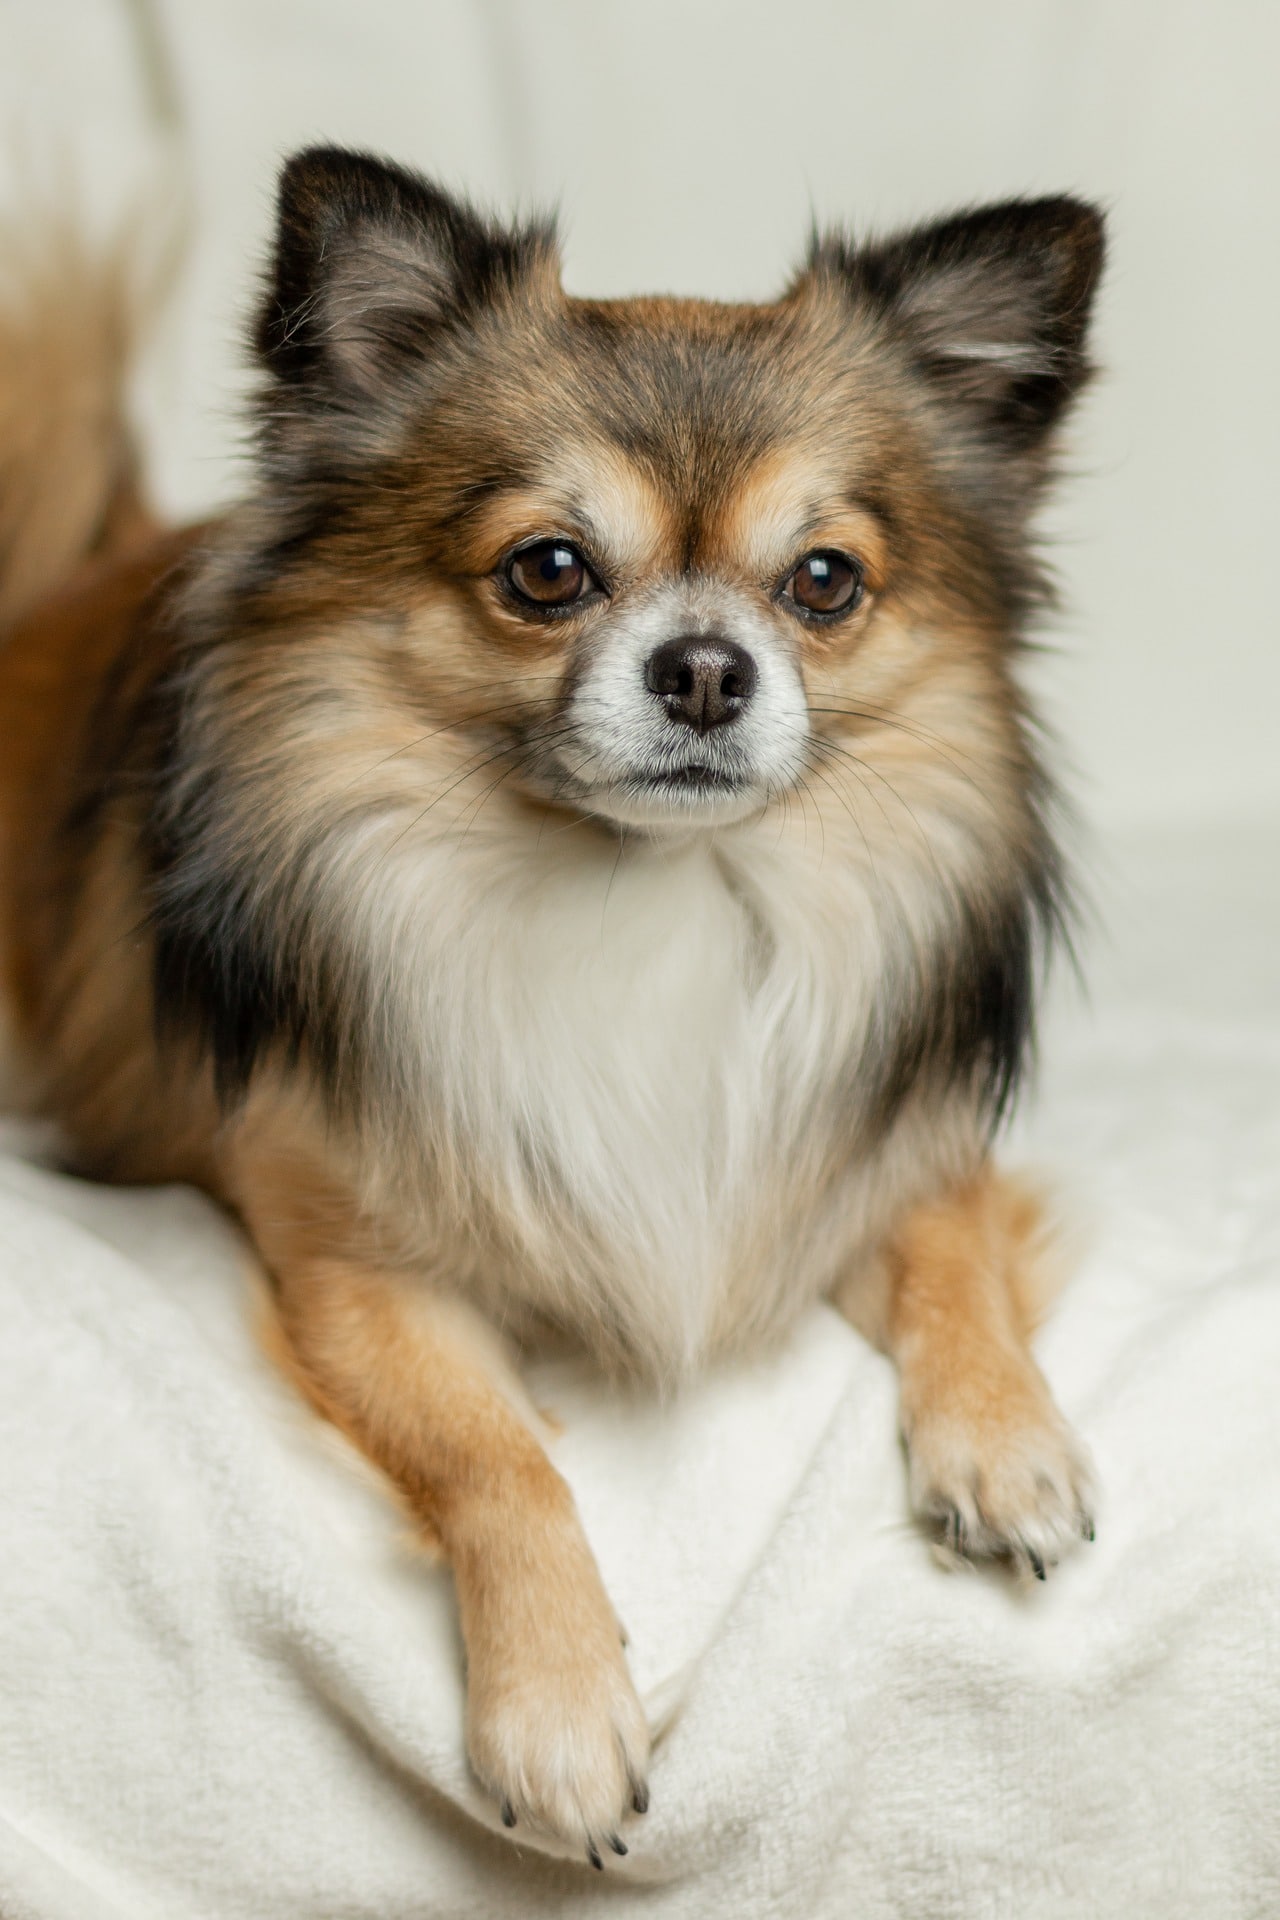 Long Haired Chihuahua Hair Cuts: A Guide to Grooming with Hairstyle Pics